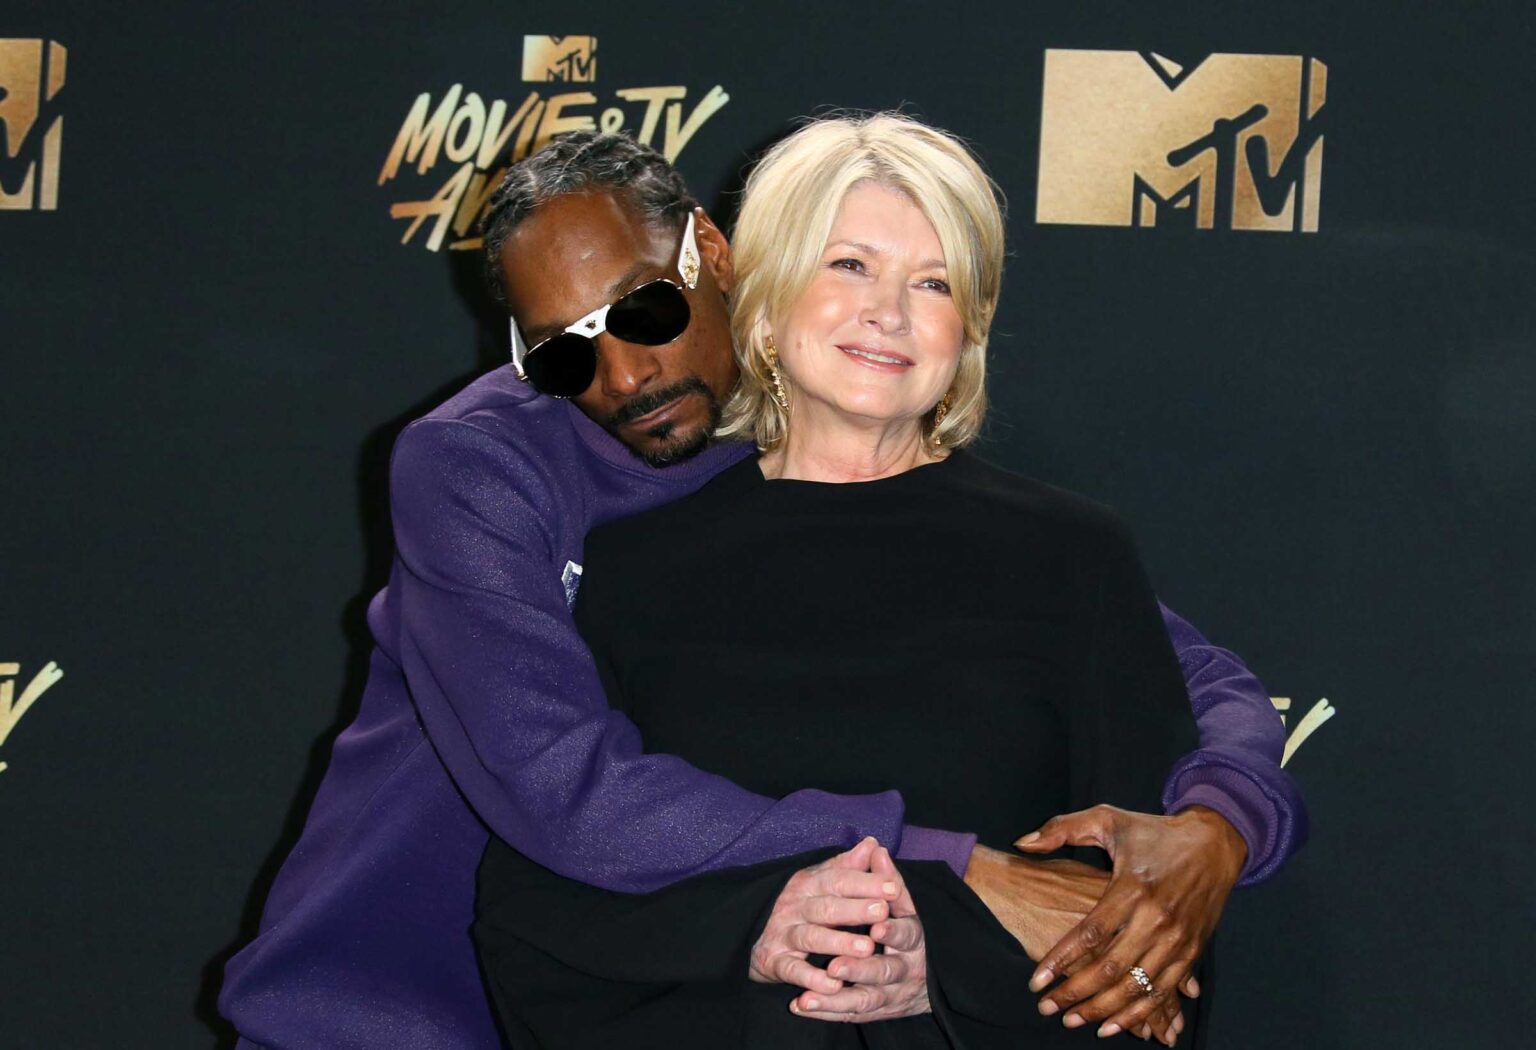 Snoop Dogg and Martha Stewart seem like a completely unlikely duo, yet the two have been friends for over ten years. How did they meet in the first place?